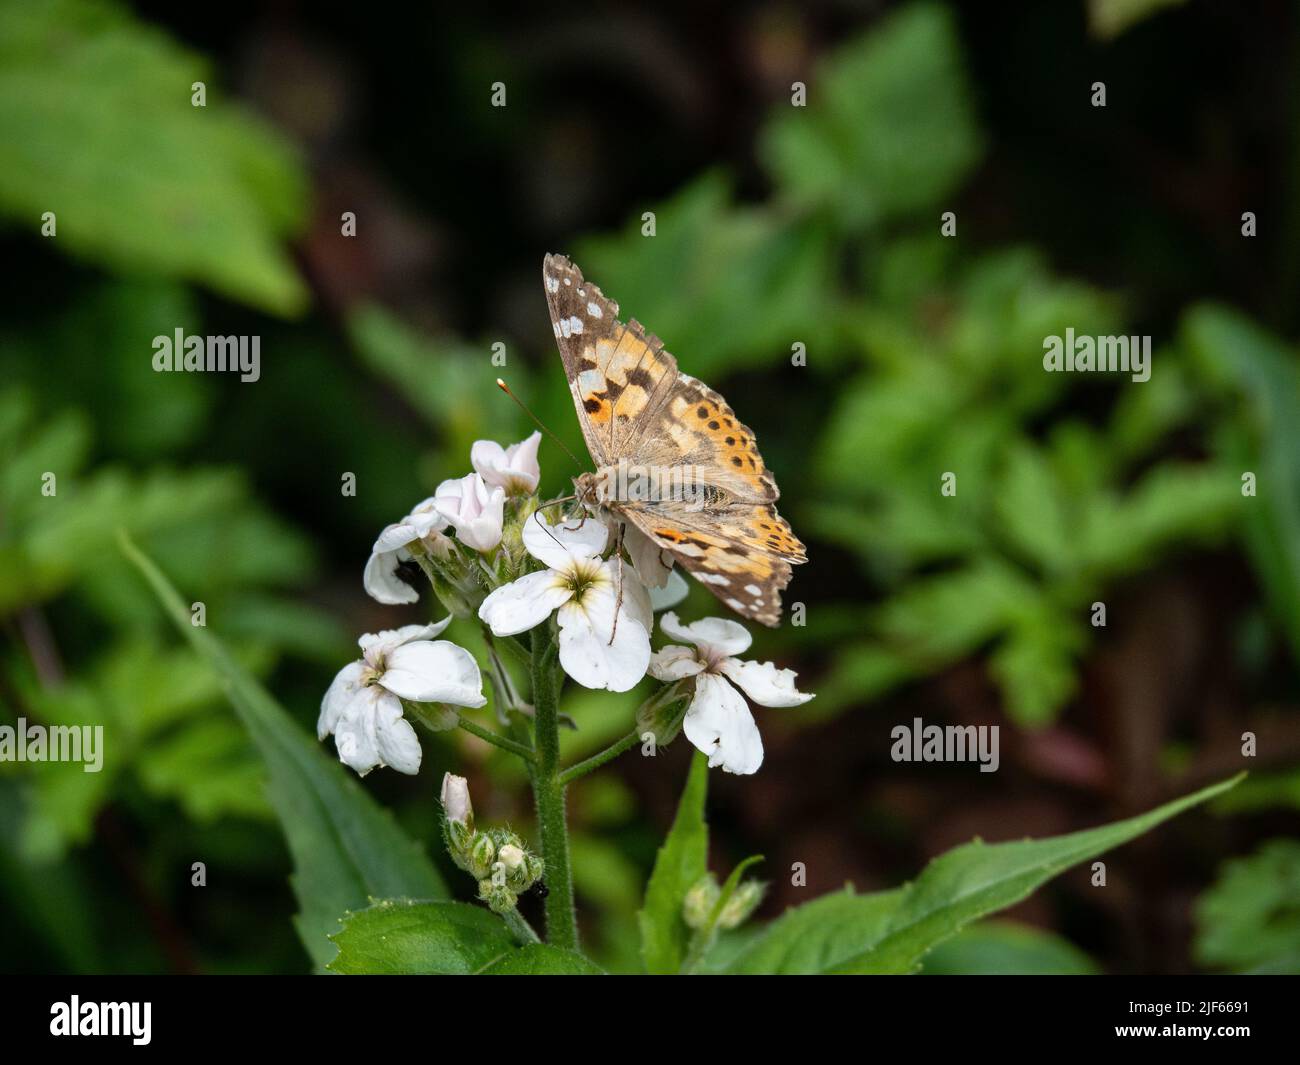 A painted lady (Vanessa cardui) buterfly feeding on a white Honesty flower Stock Photo